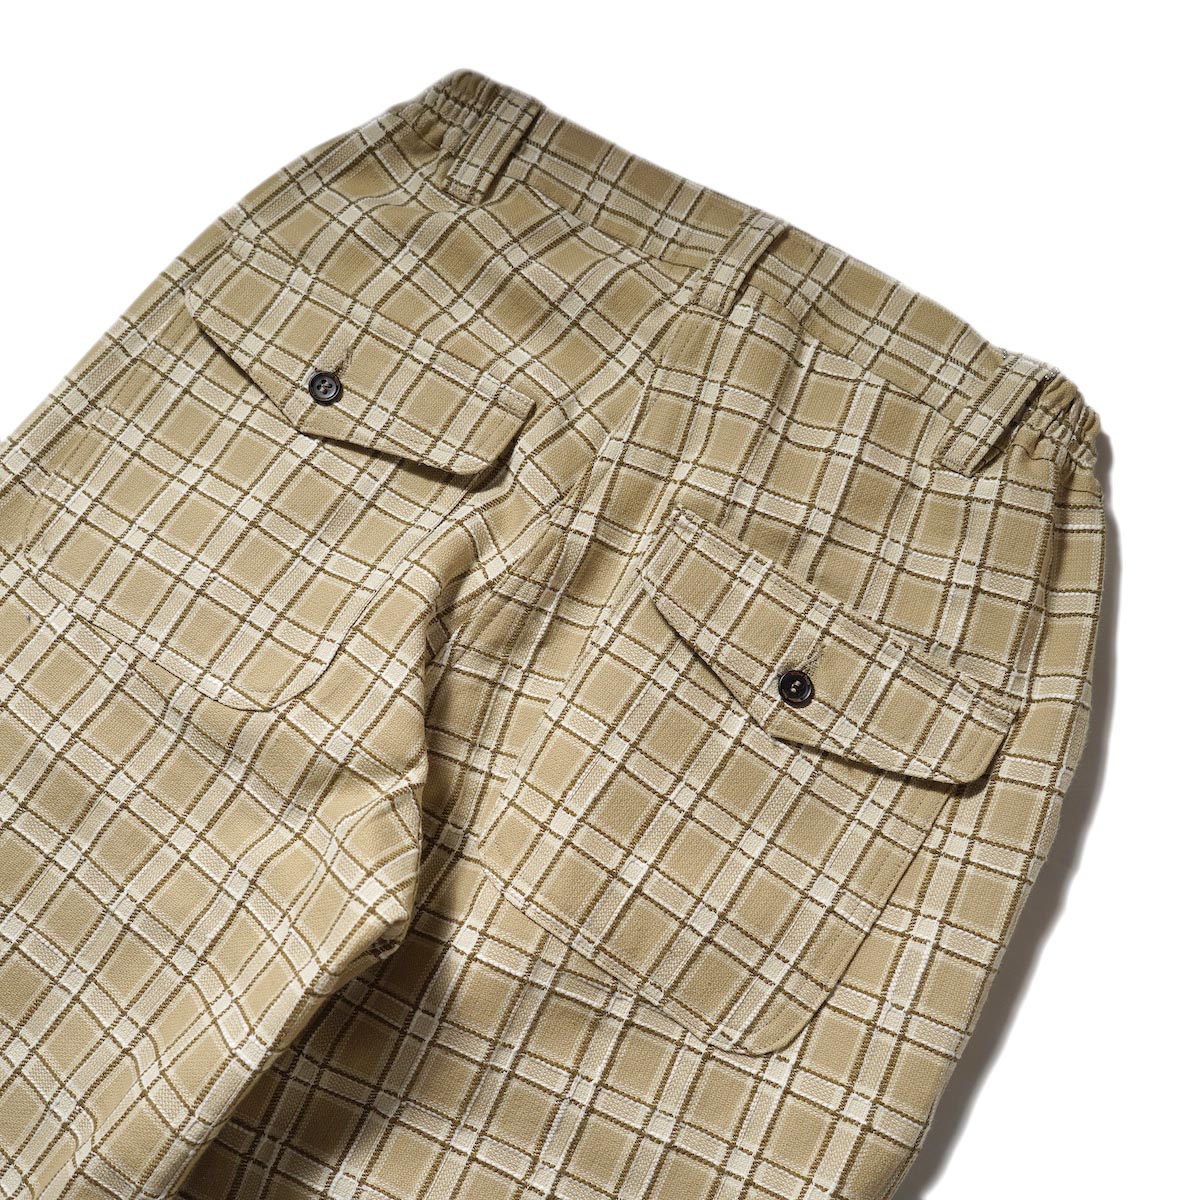 Willow Pants / P-008 - Dead Stock Beige Check Pants ヒップポケット